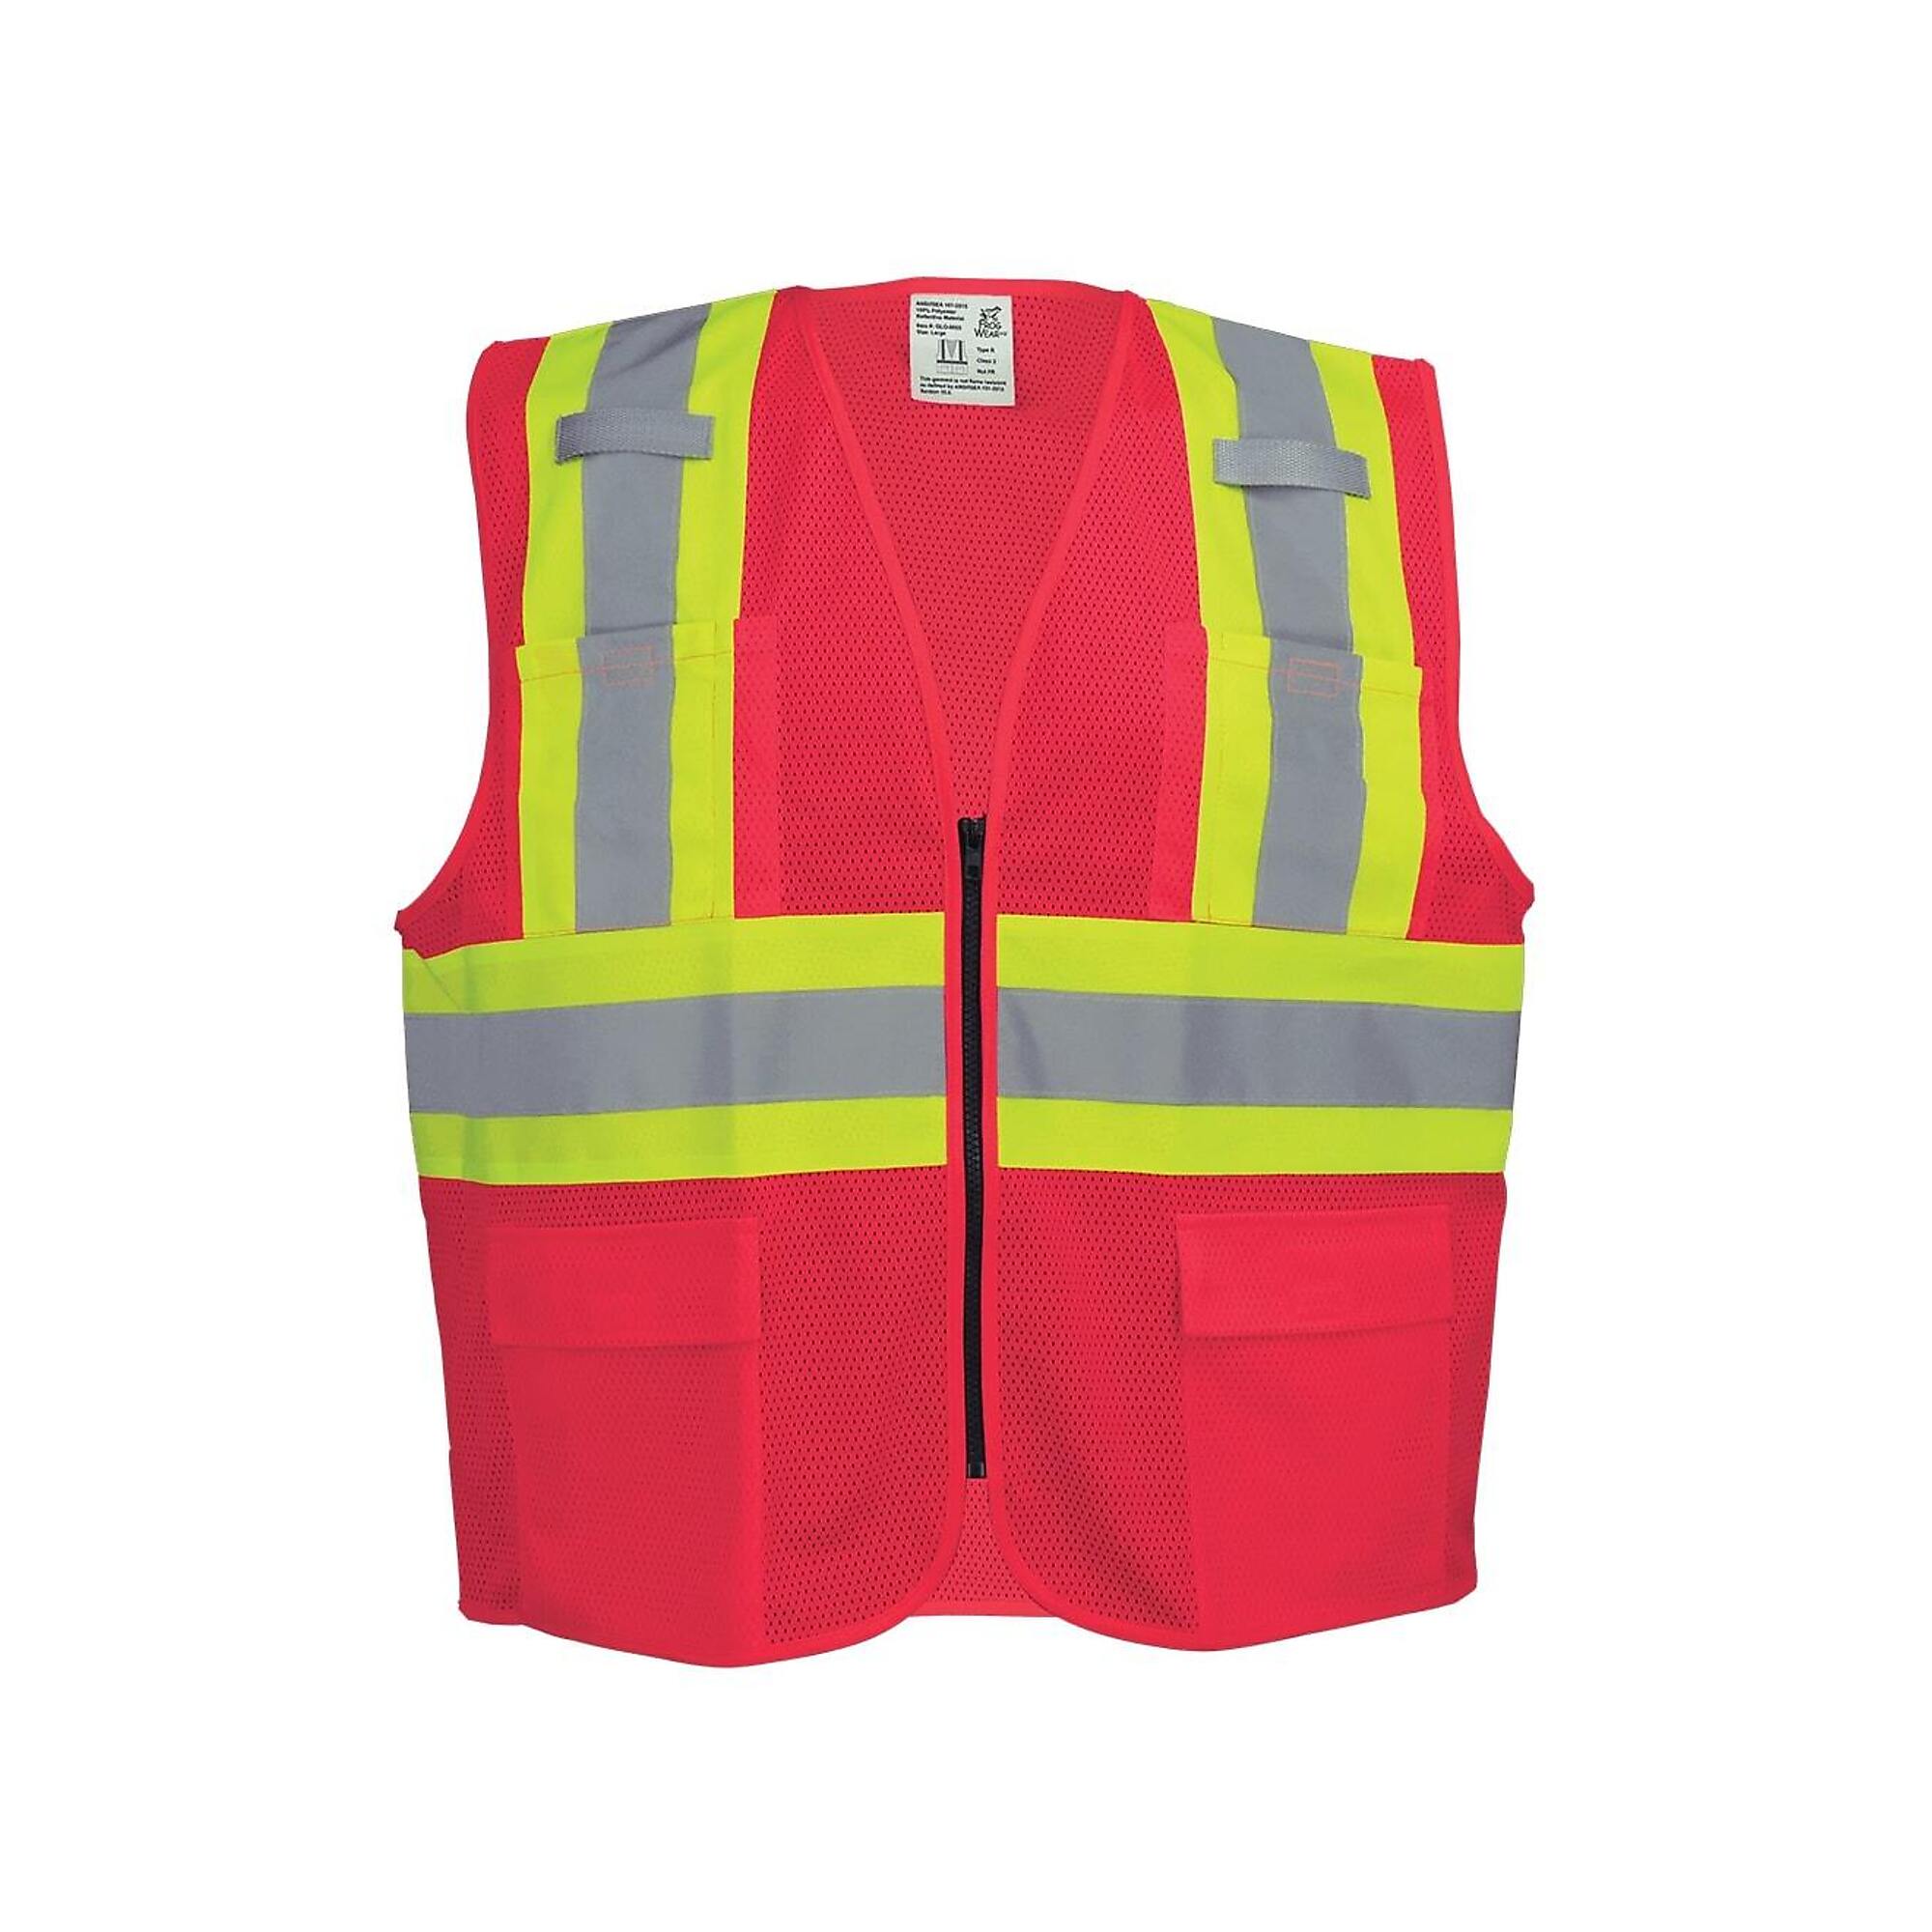 FrogWear, HV Red, Class 2 6 Pockets, Mesh Vest, Size 3XL, Color High-Visibility Red, Model GLO-0055-3XL